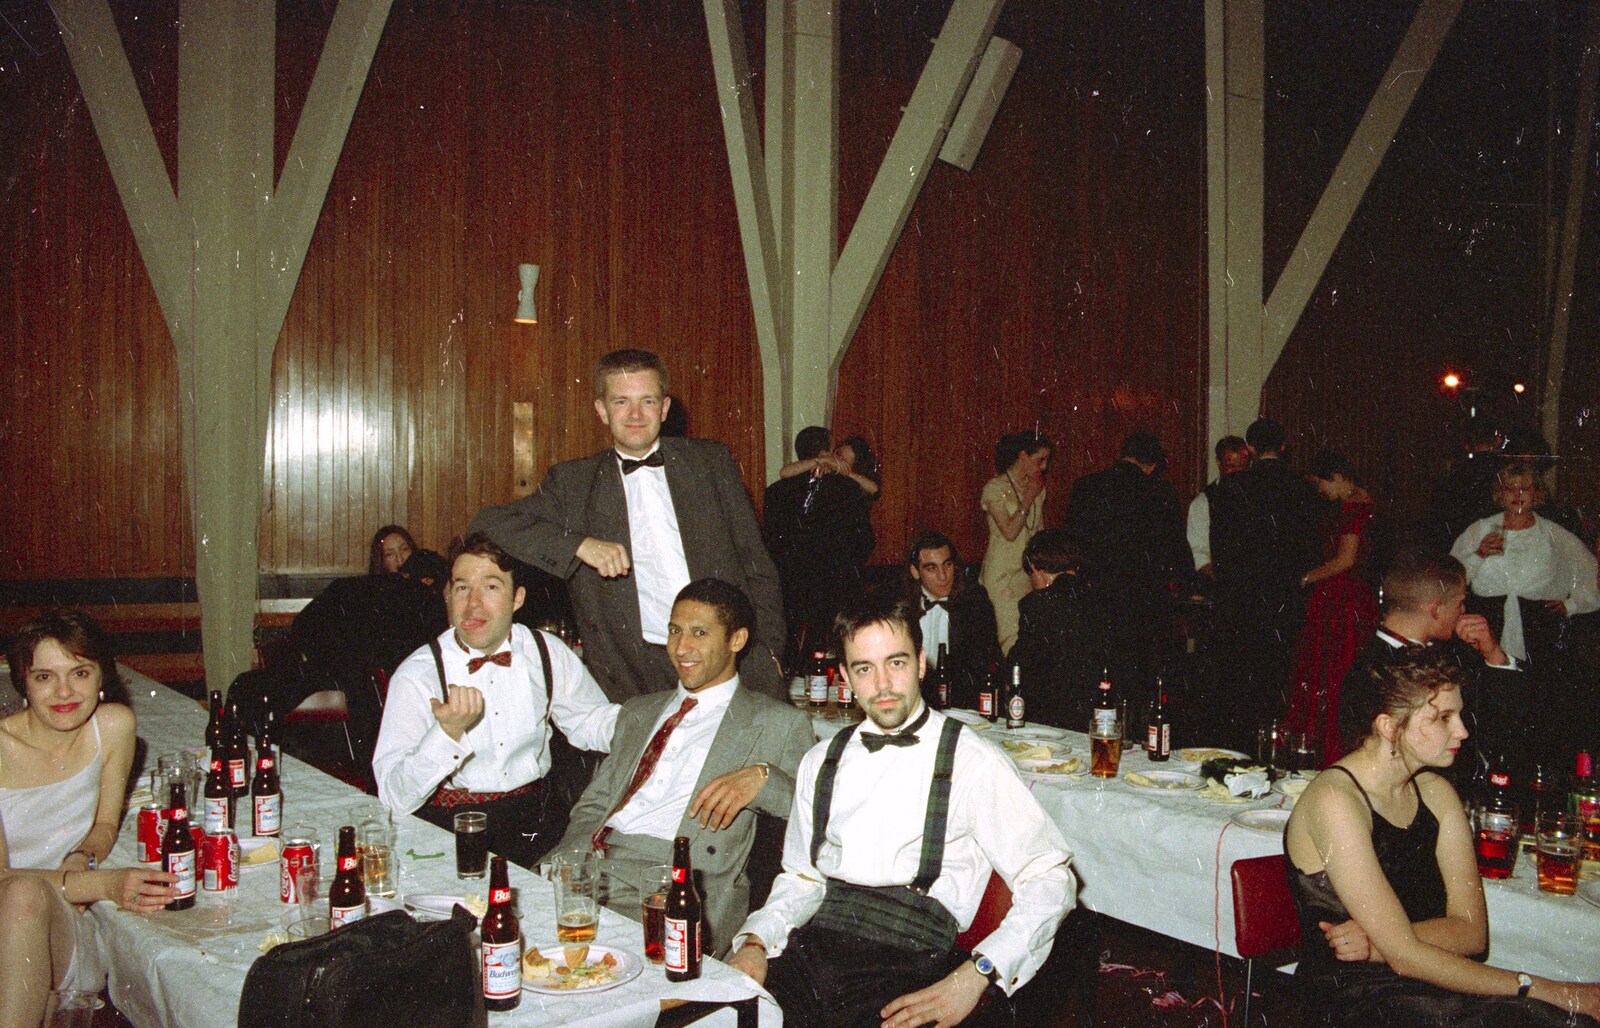 Tim, Nosher, Rob Wilmot and Trev from CISU at the Suffolk College May Ball, Ipswich, Suffolk - 11th May 1997